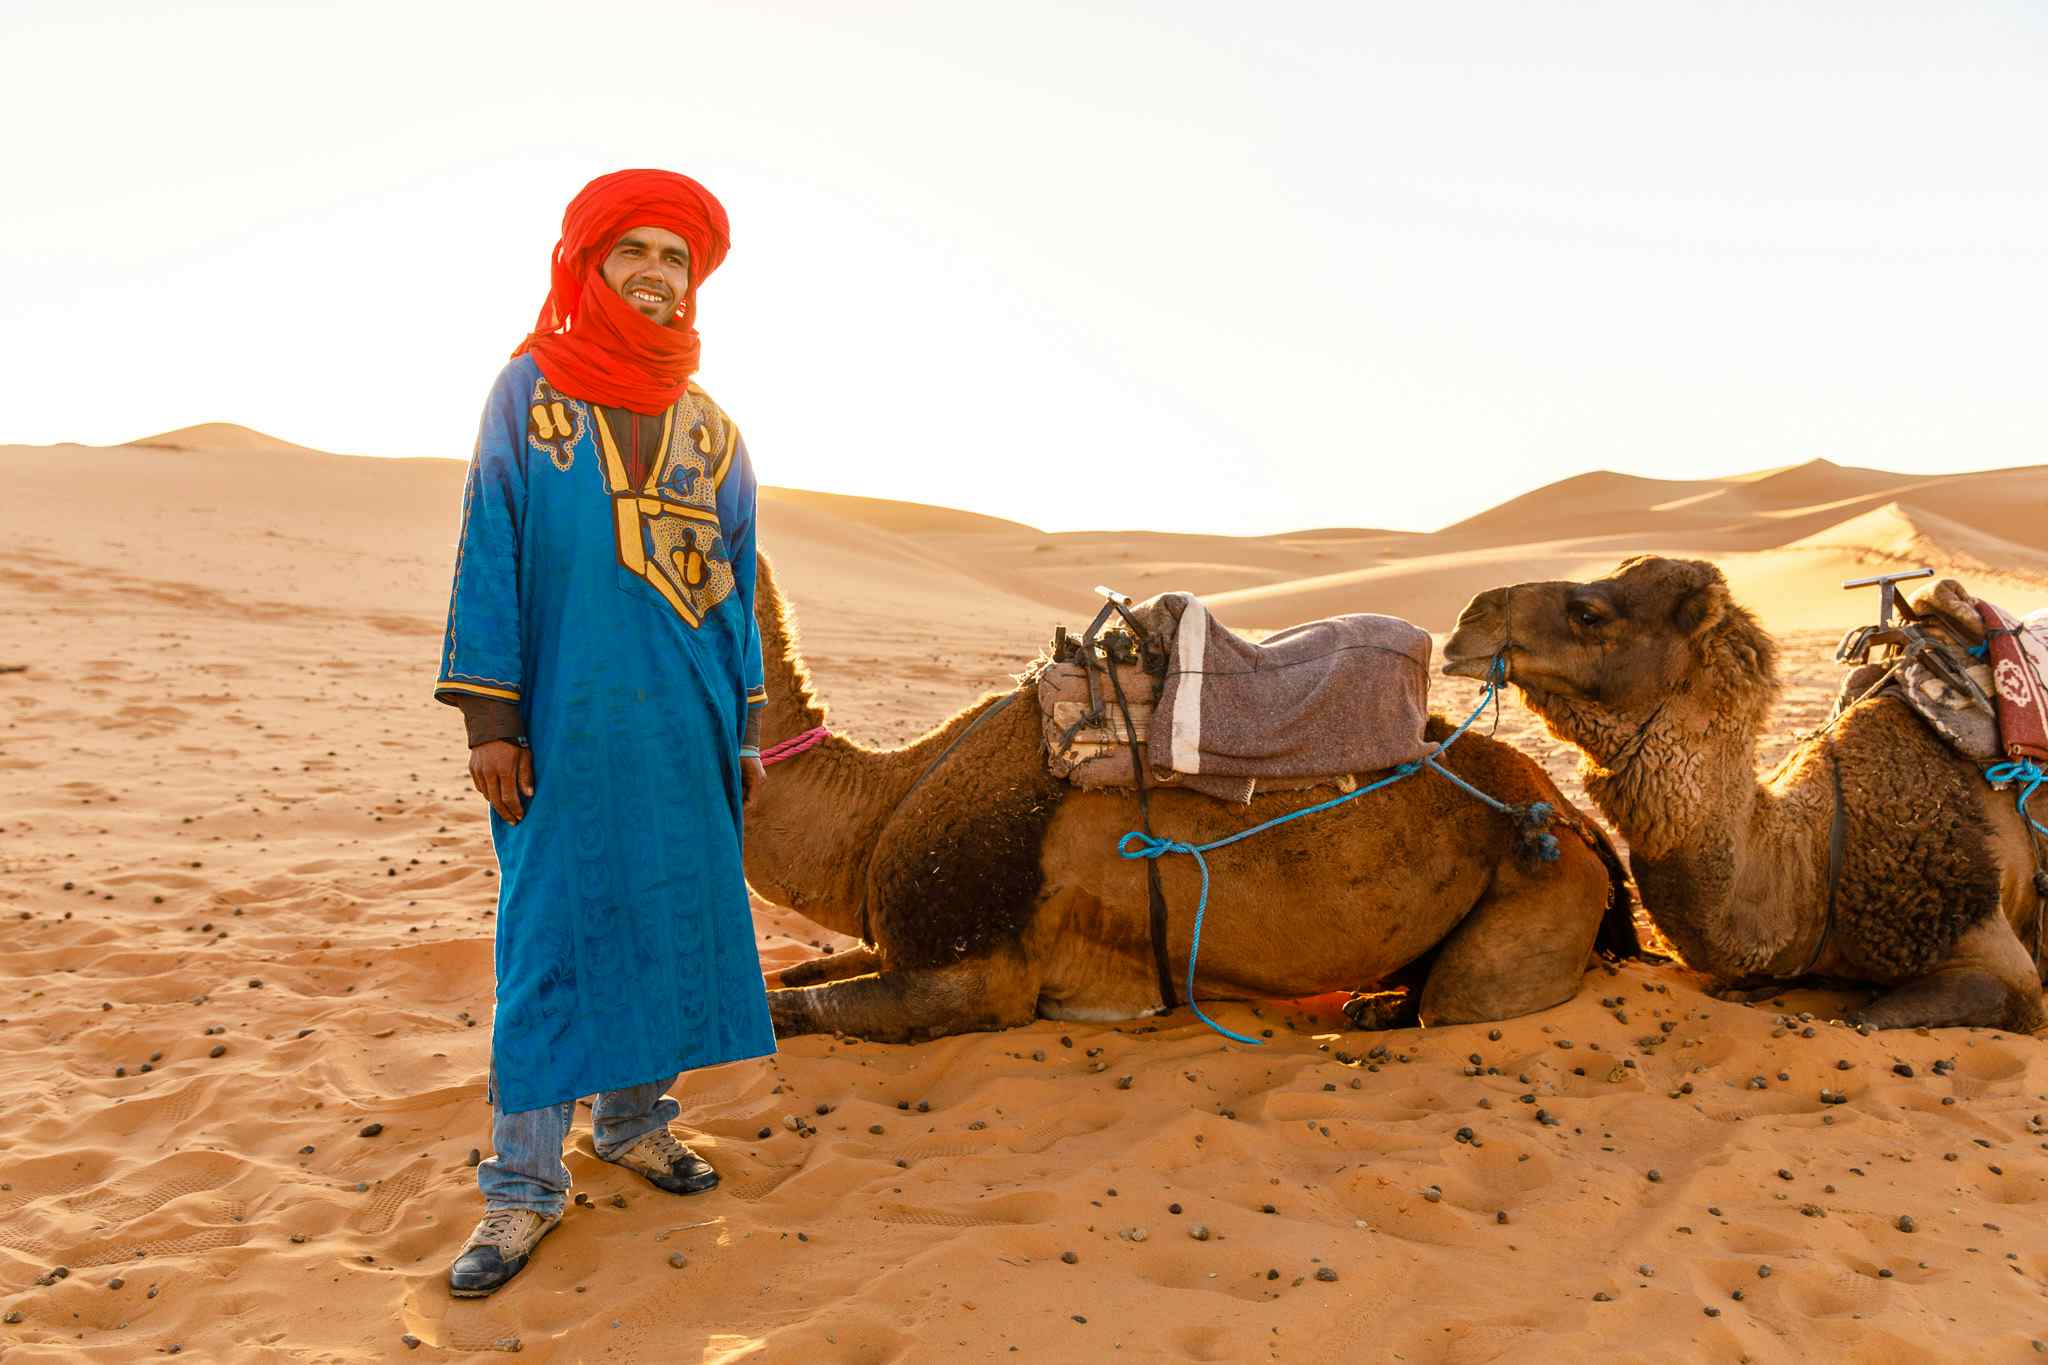 A Berber guide stands beside a camel in the Sahara Desert, Morocco. 